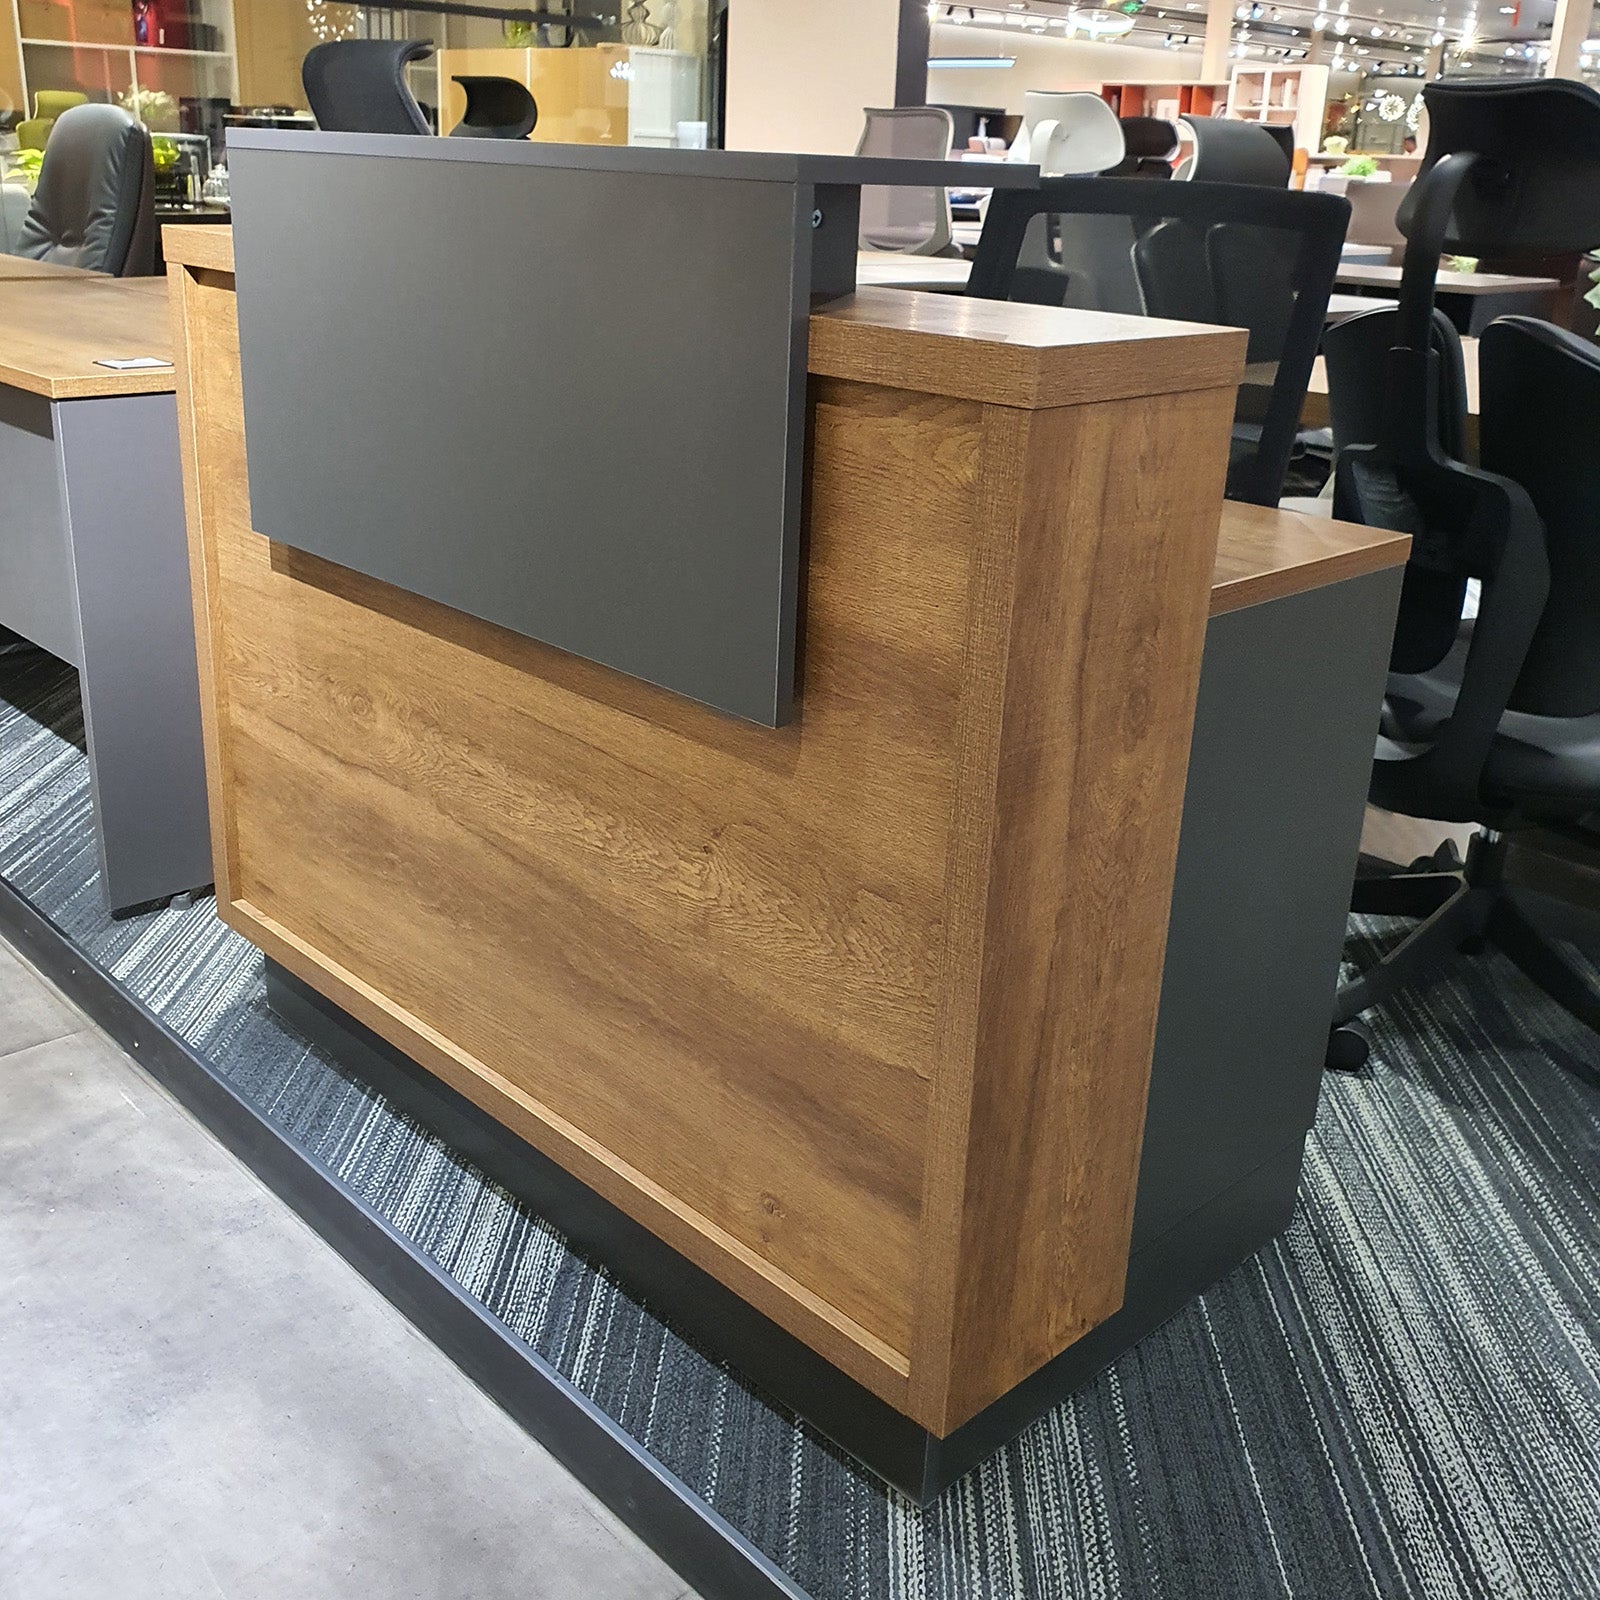 VOFFOV® Front Desk for Office Space